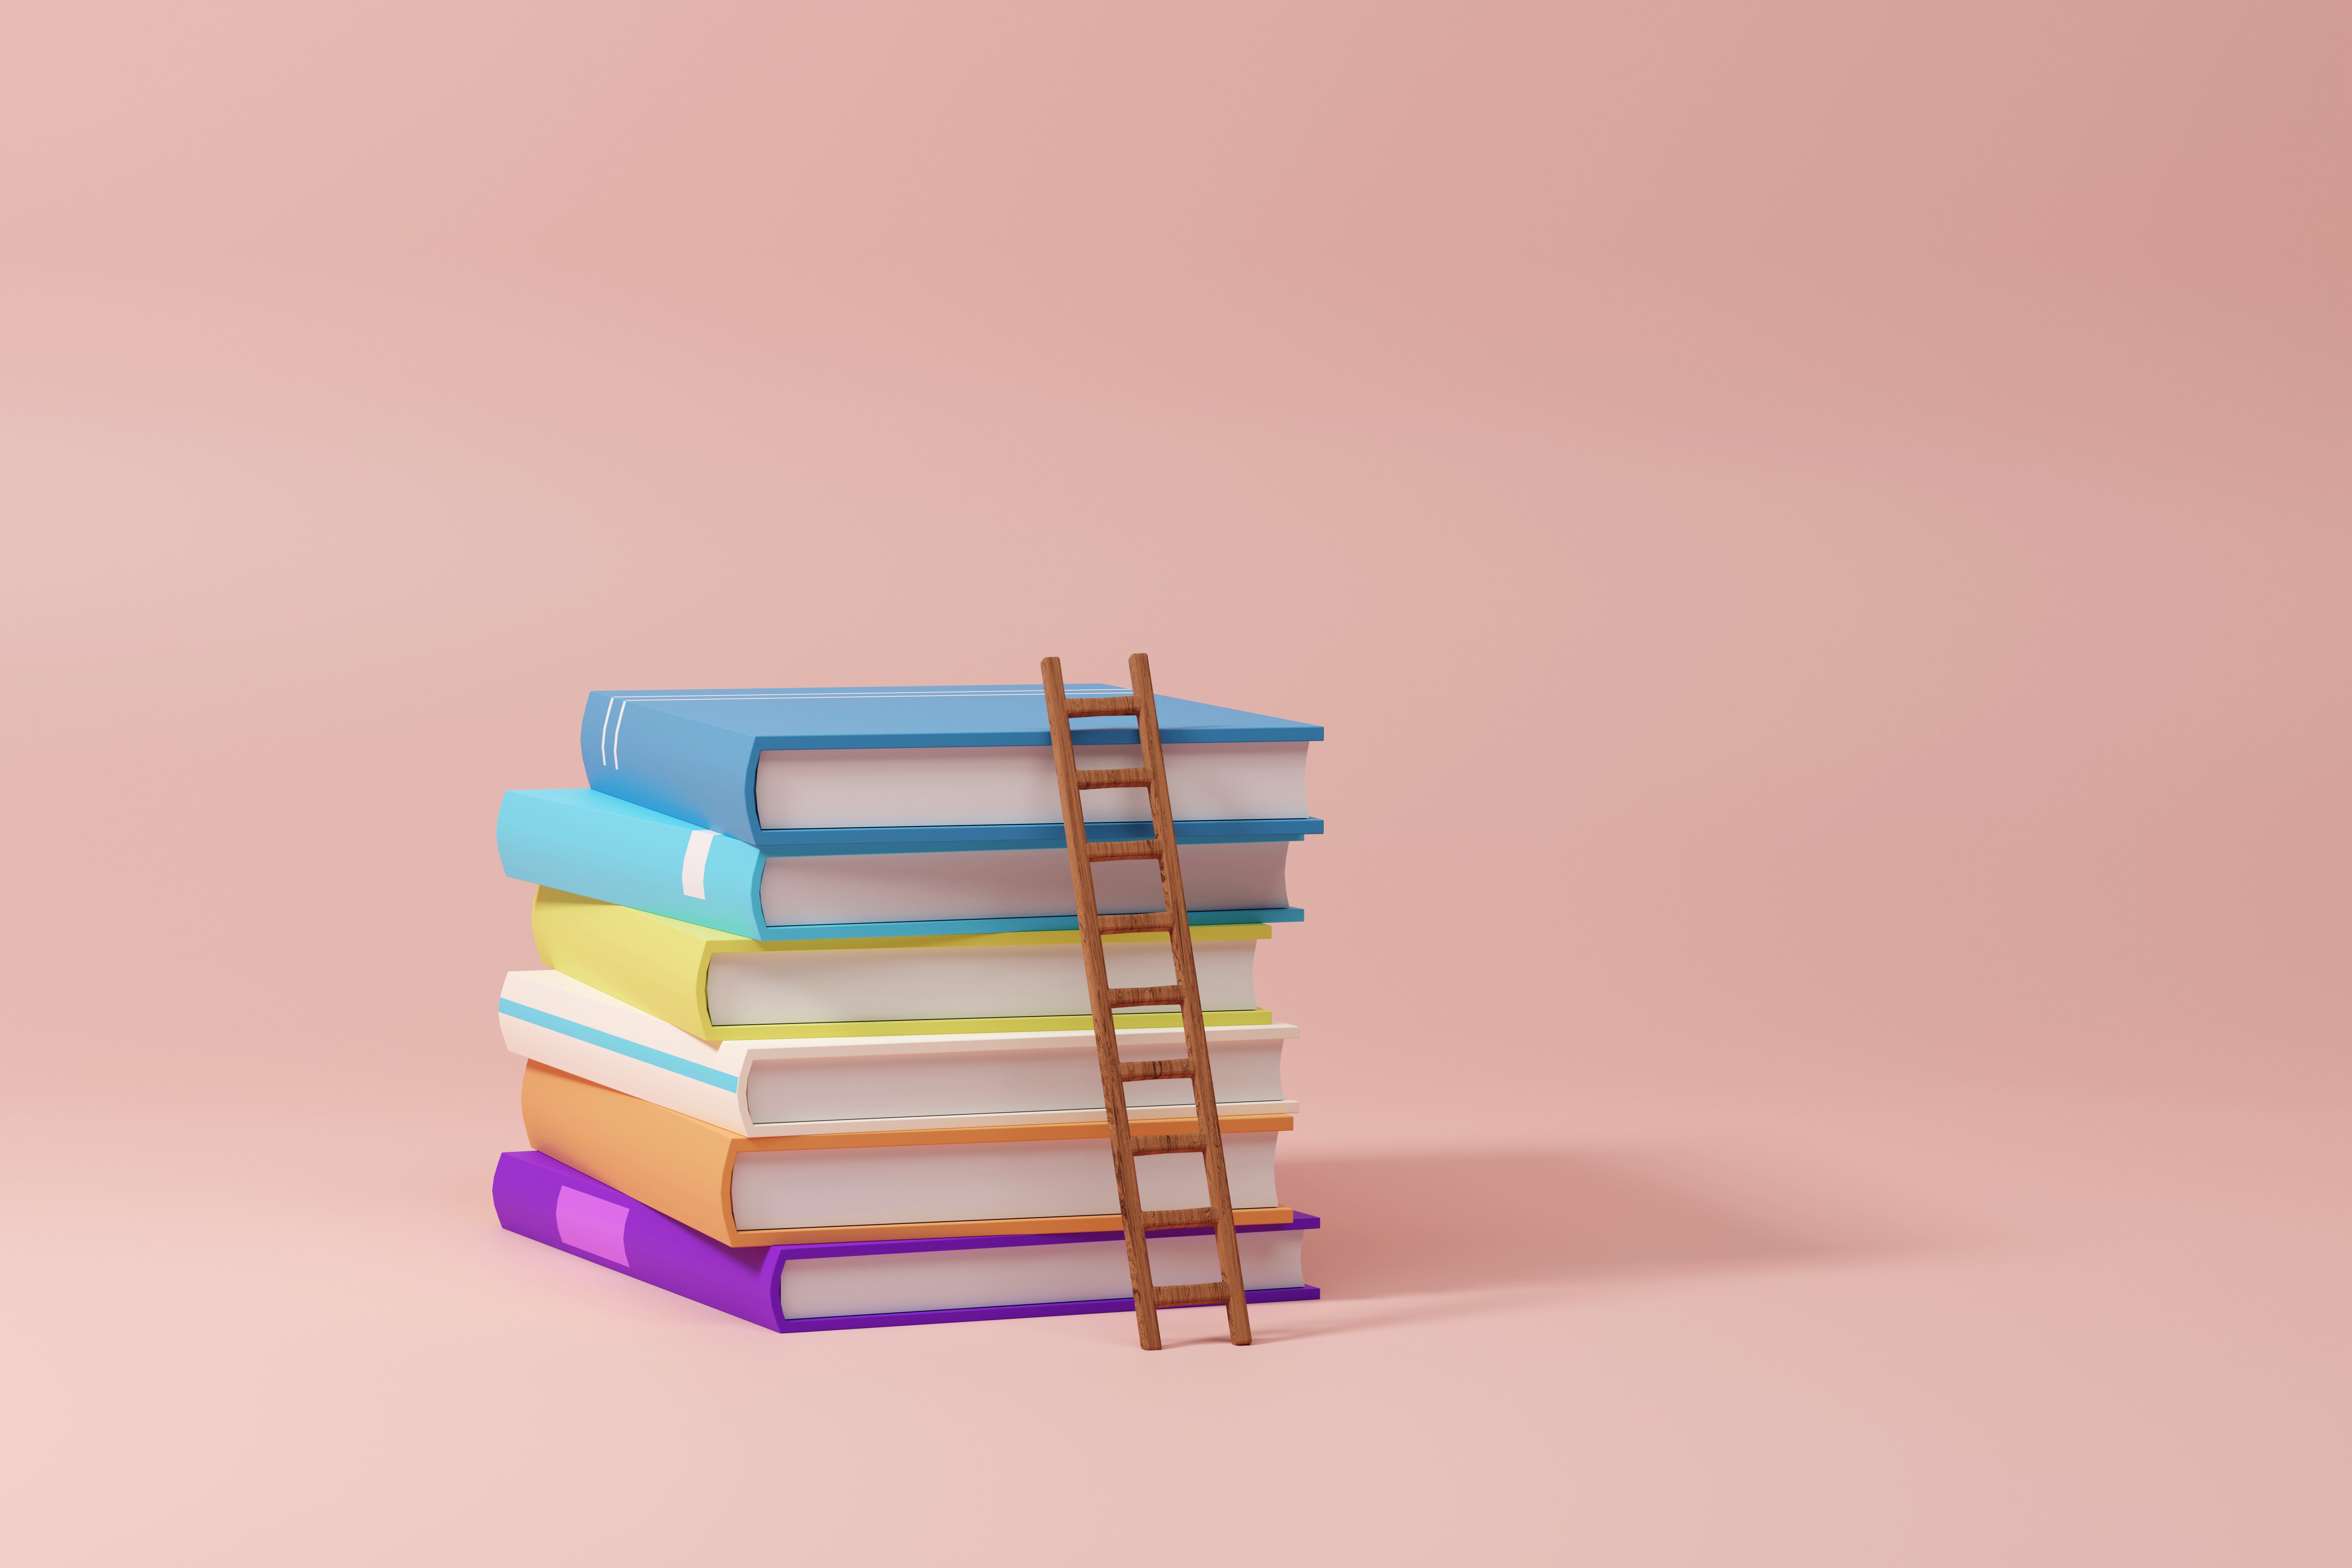 A stack of books on row with little ladder on colorful background.